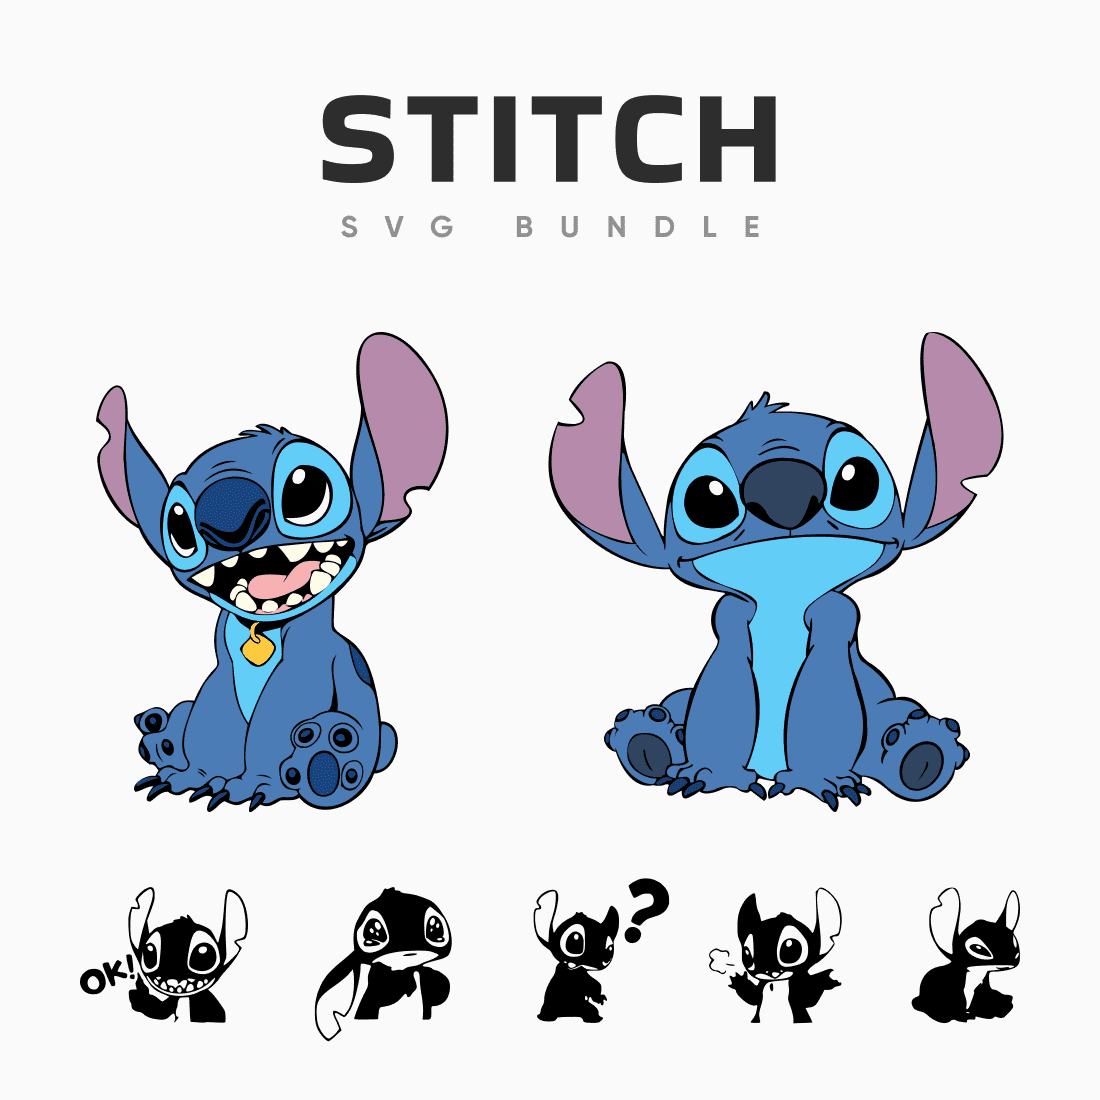 stitch svg collection cover image.